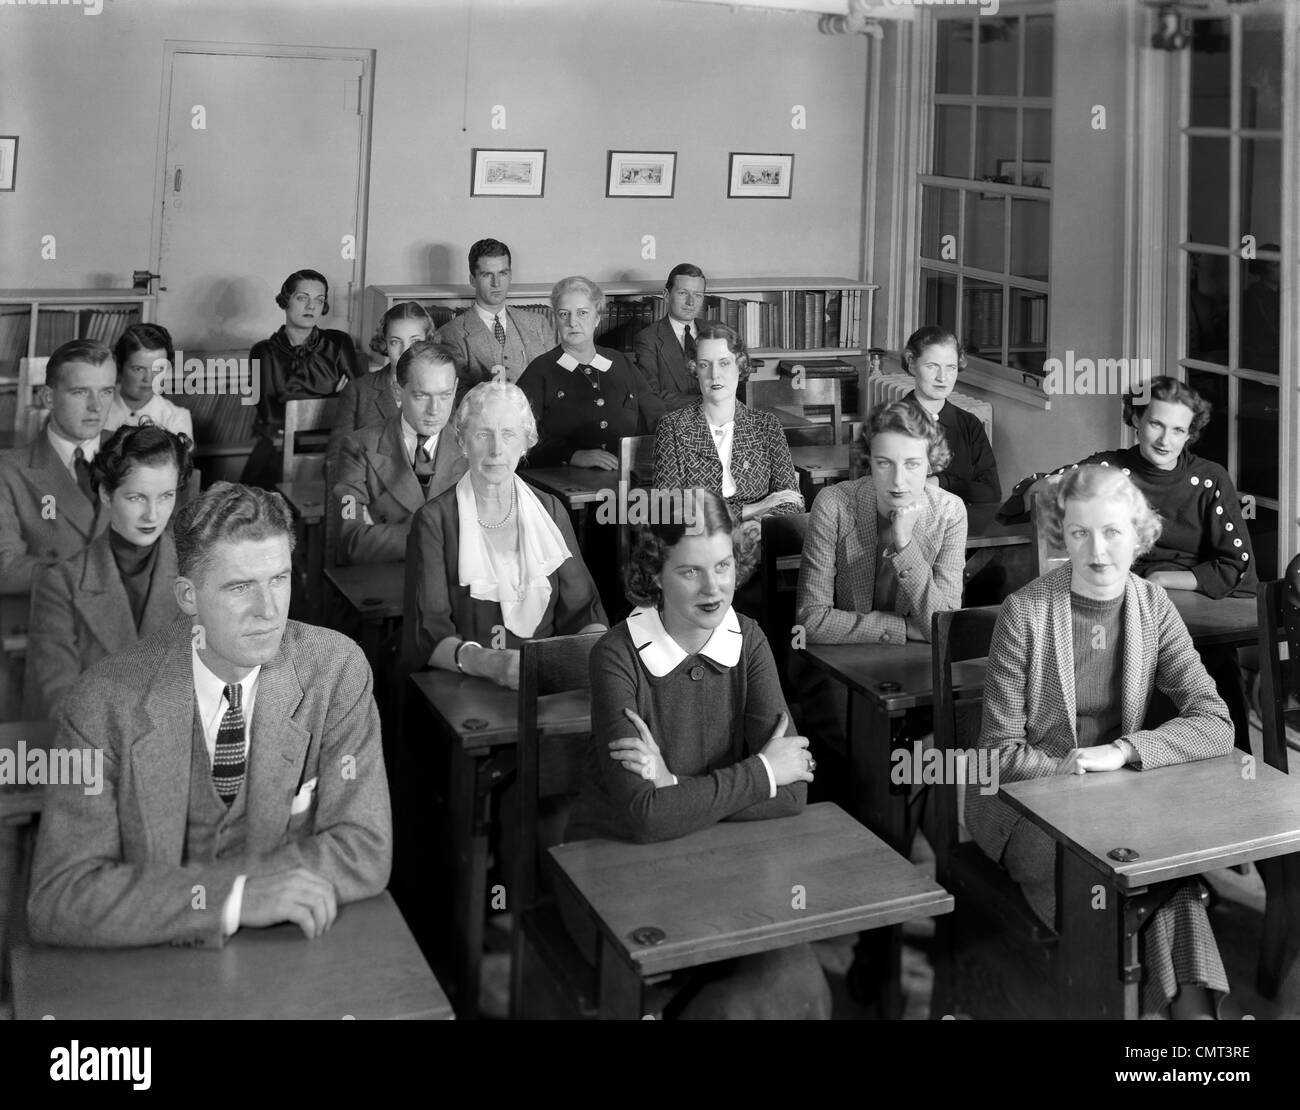 1930s 1940s CLASSROOM GROUP OF MEN AND WOMEN IN VOCATIONAL TRAINING ADULT EDUCATION Stock Photo